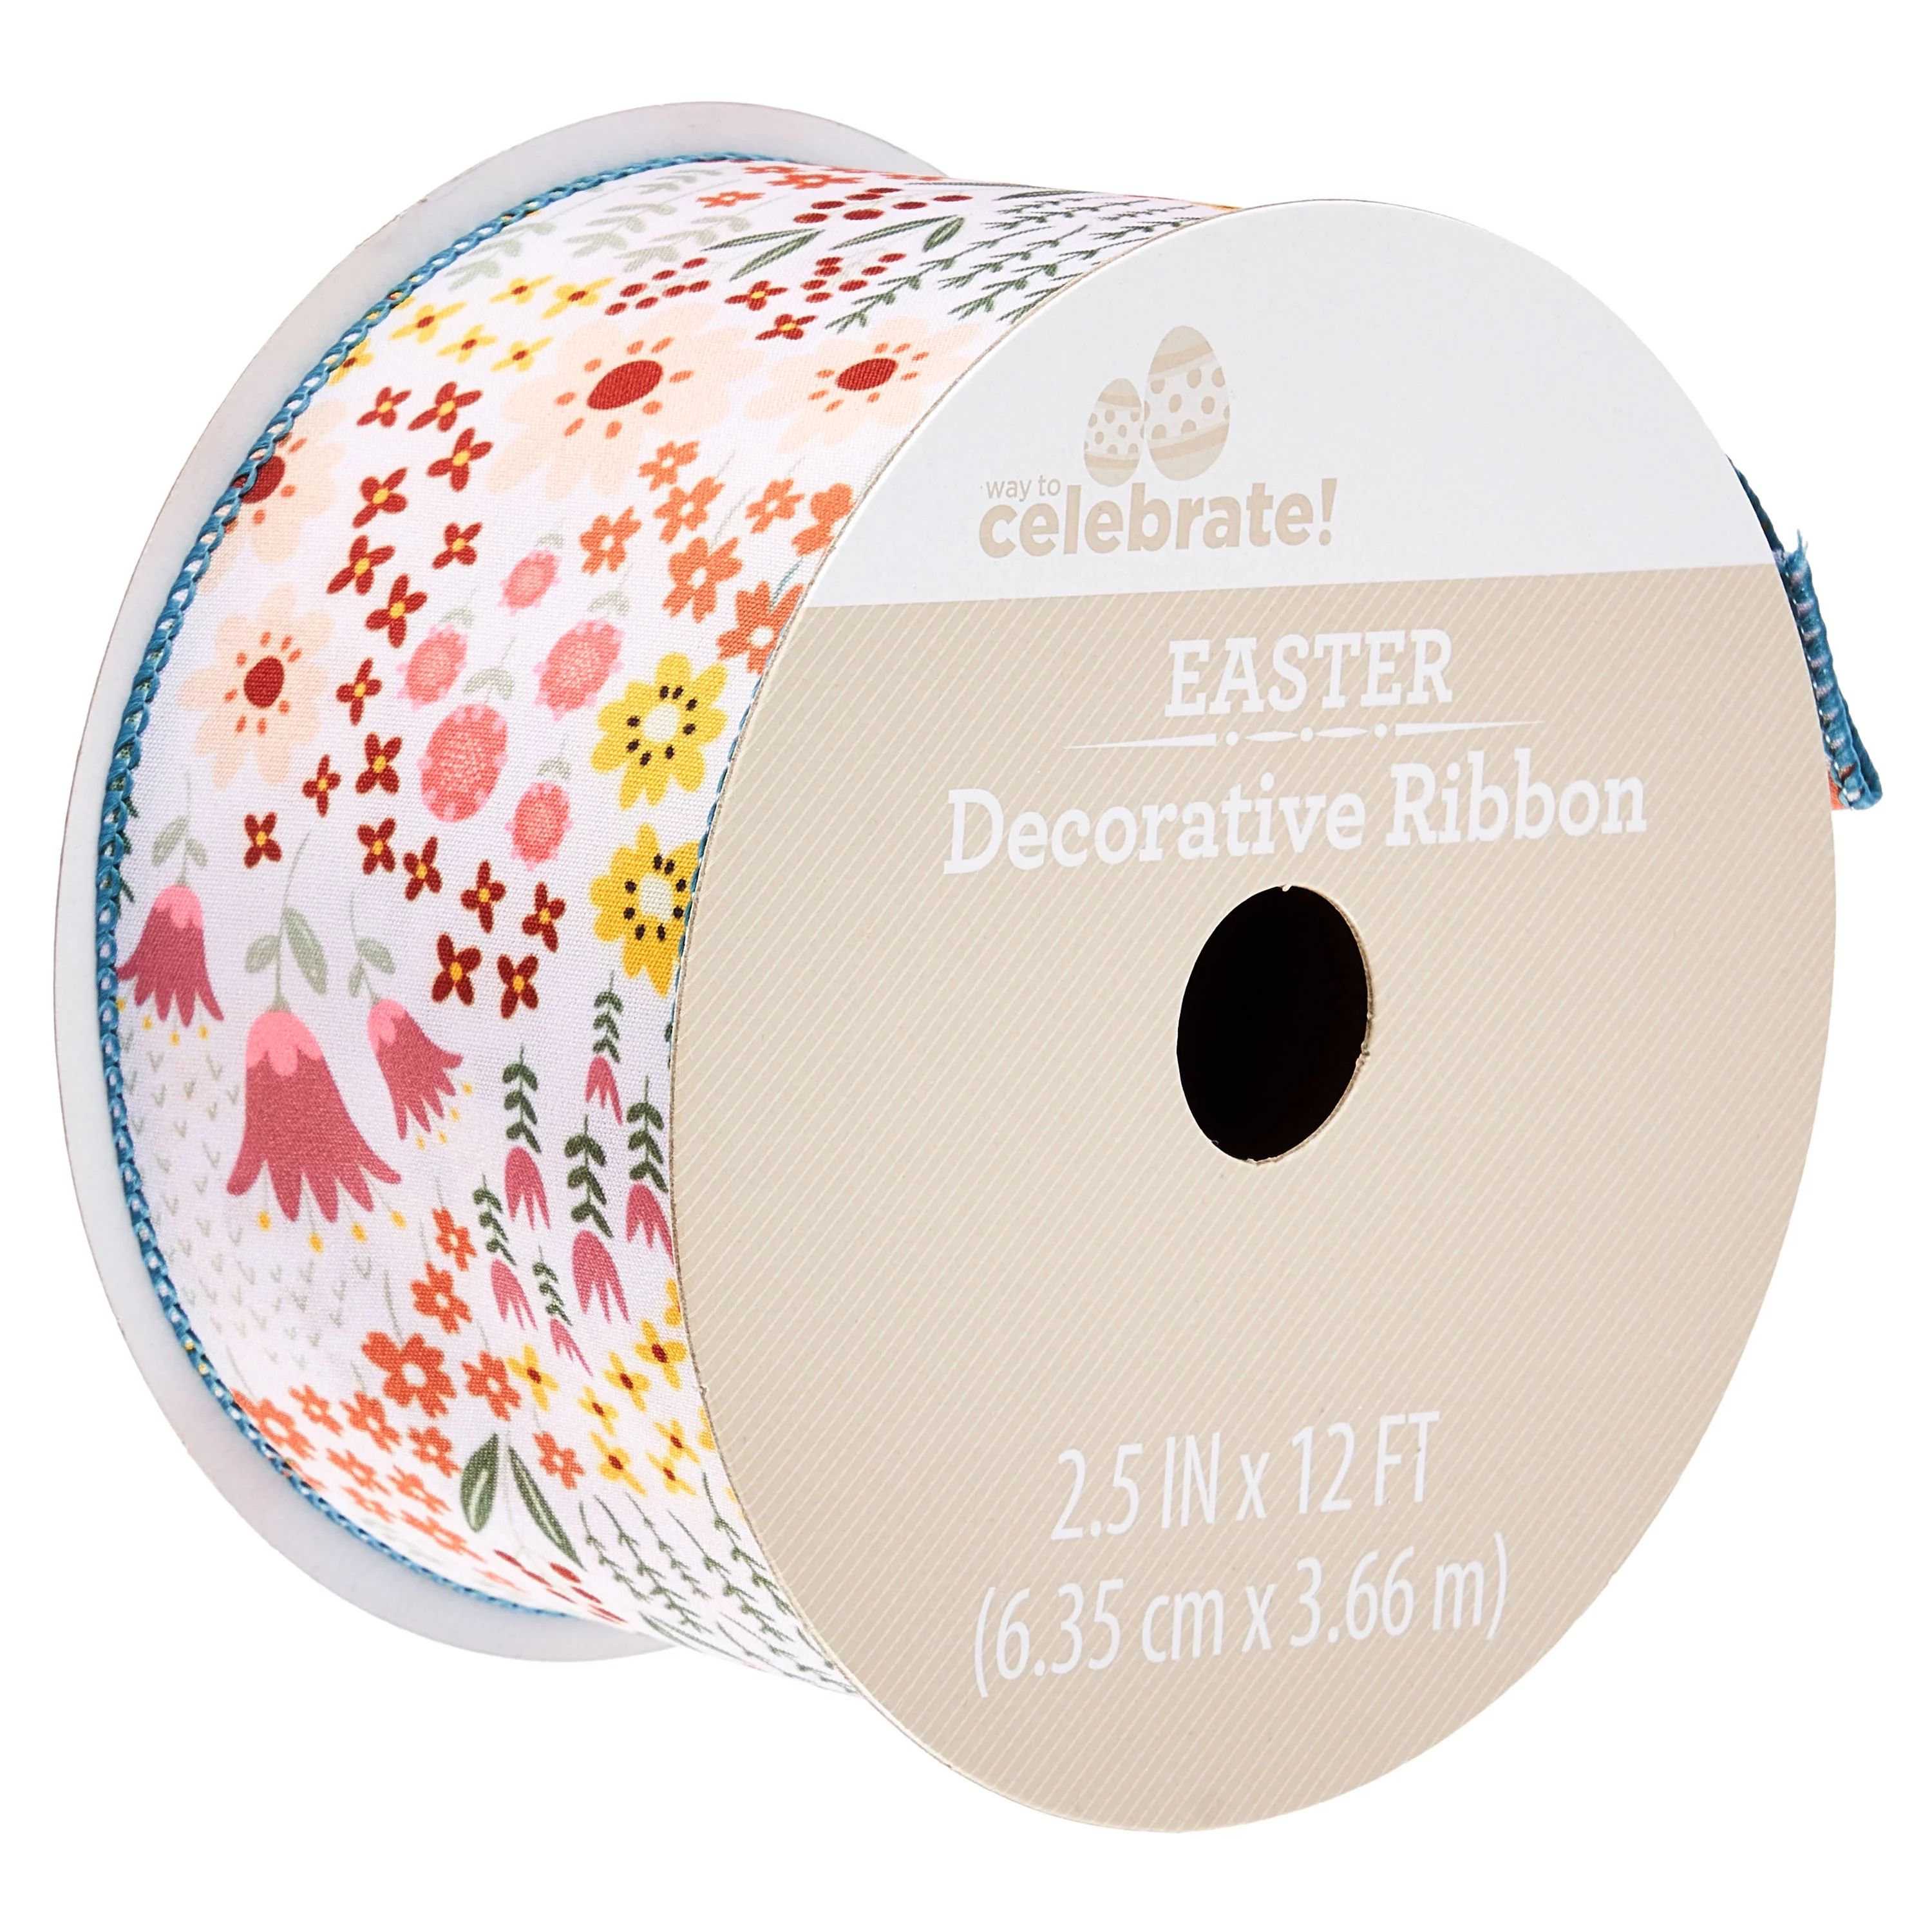 Way To Celebrate Easter Decorative Ribbon, Floral, 2.5" x 12' | Walmart (US)